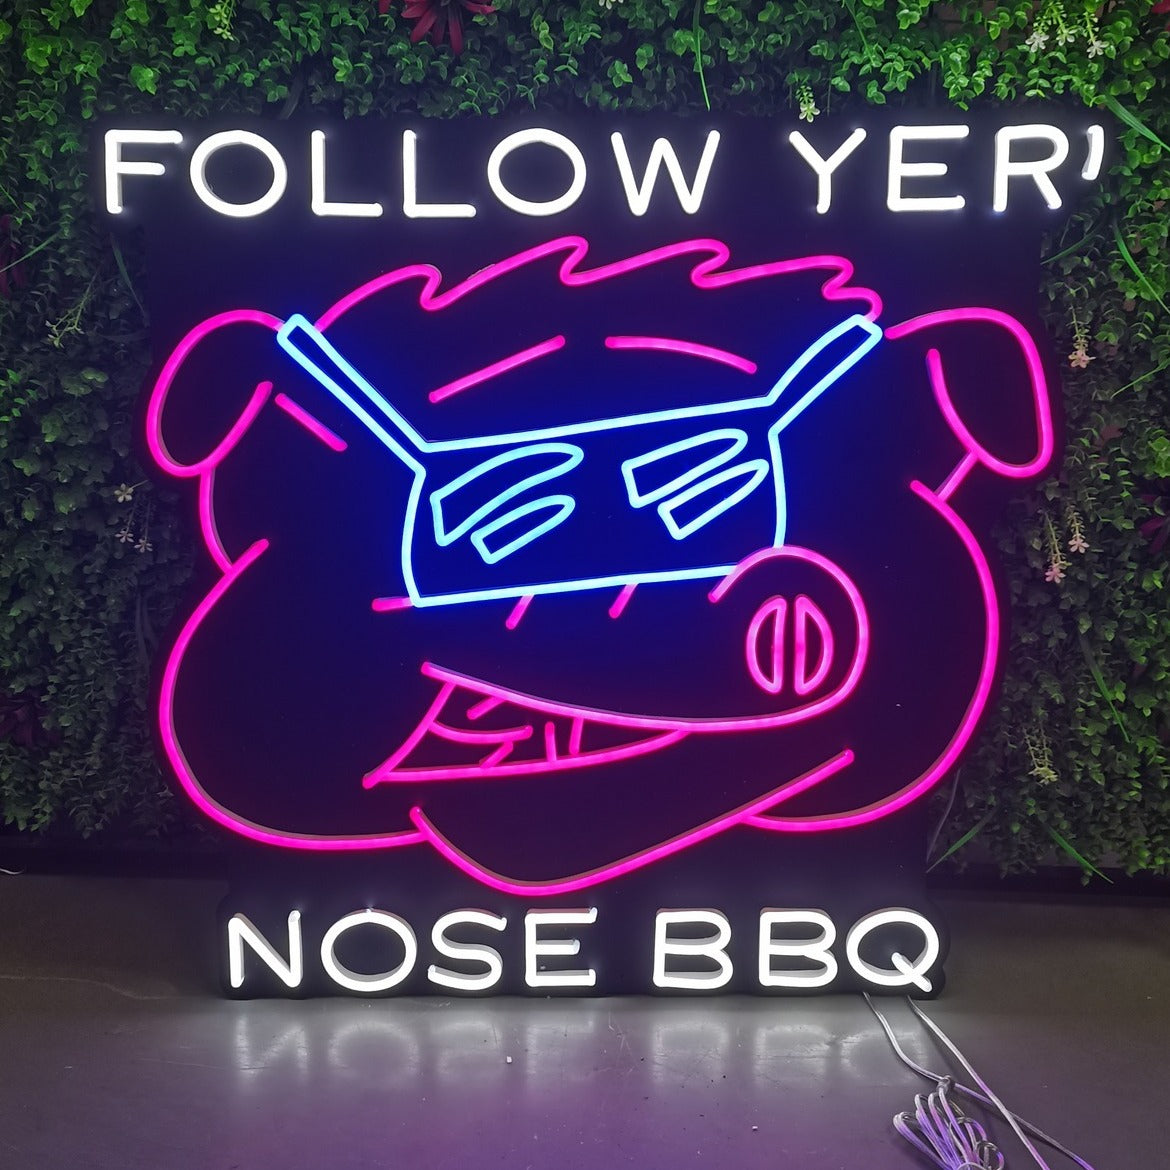 Follow Yer' Nose BBQ Neon Sign